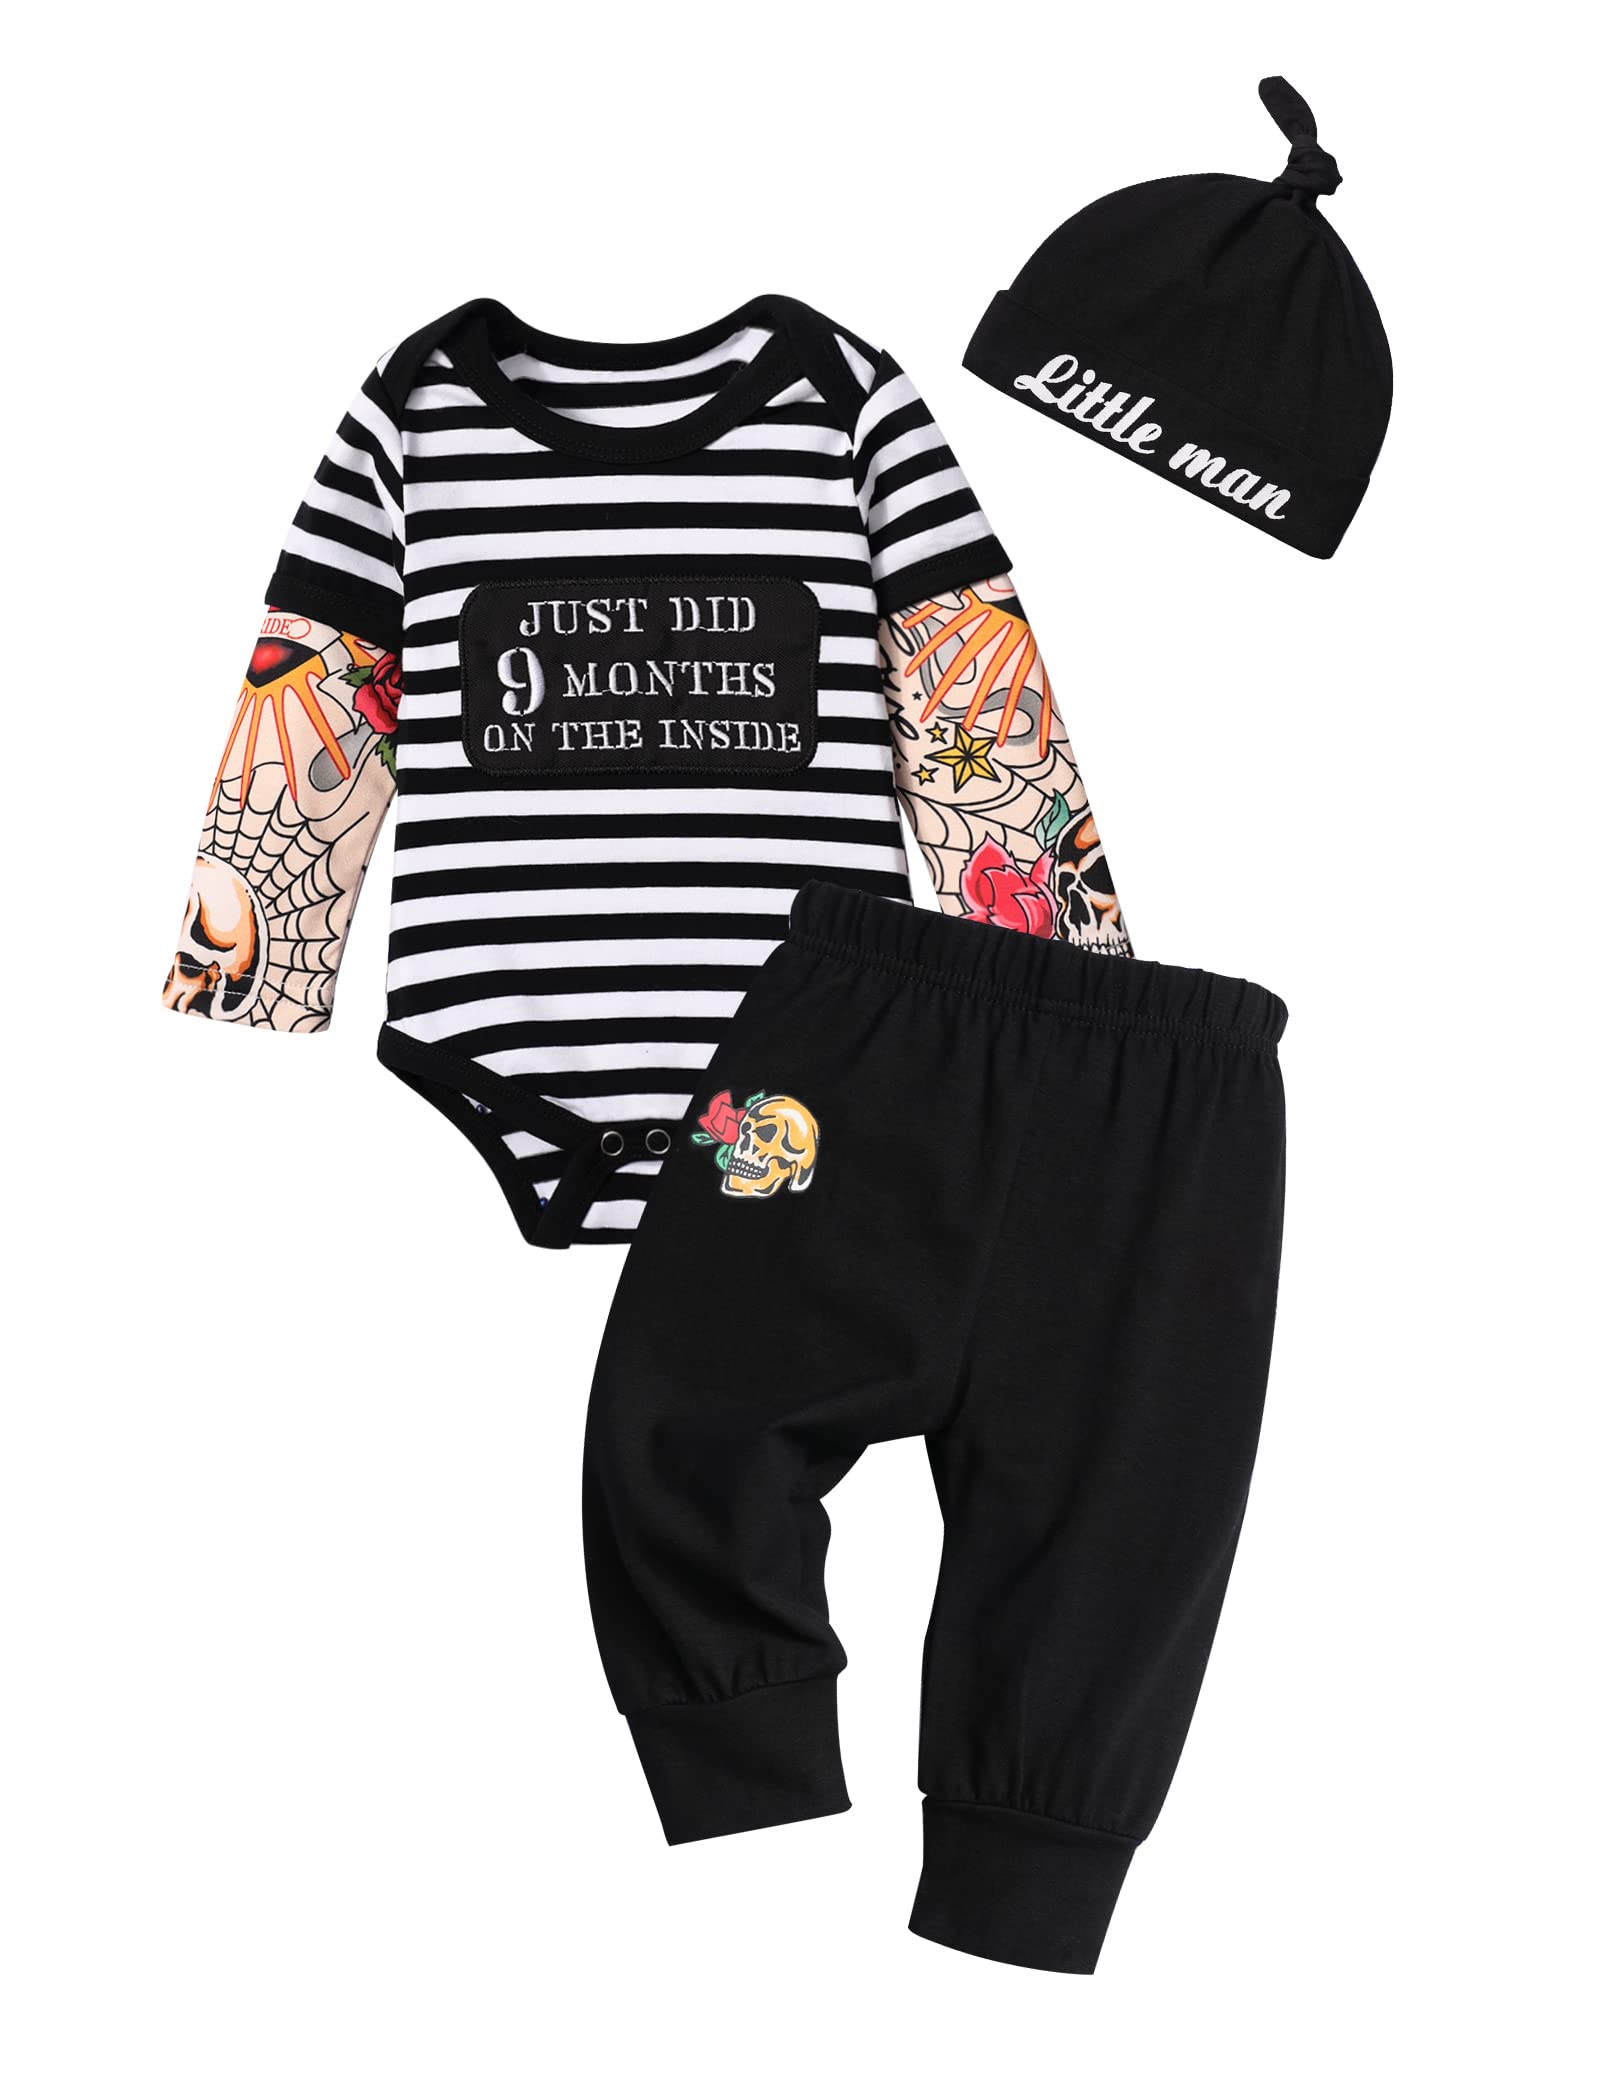 Fommy Baby Boy Clothes Letter Print Long Sleeve Romper+Camouflage Pants+Hat 3PCS Outfits Set